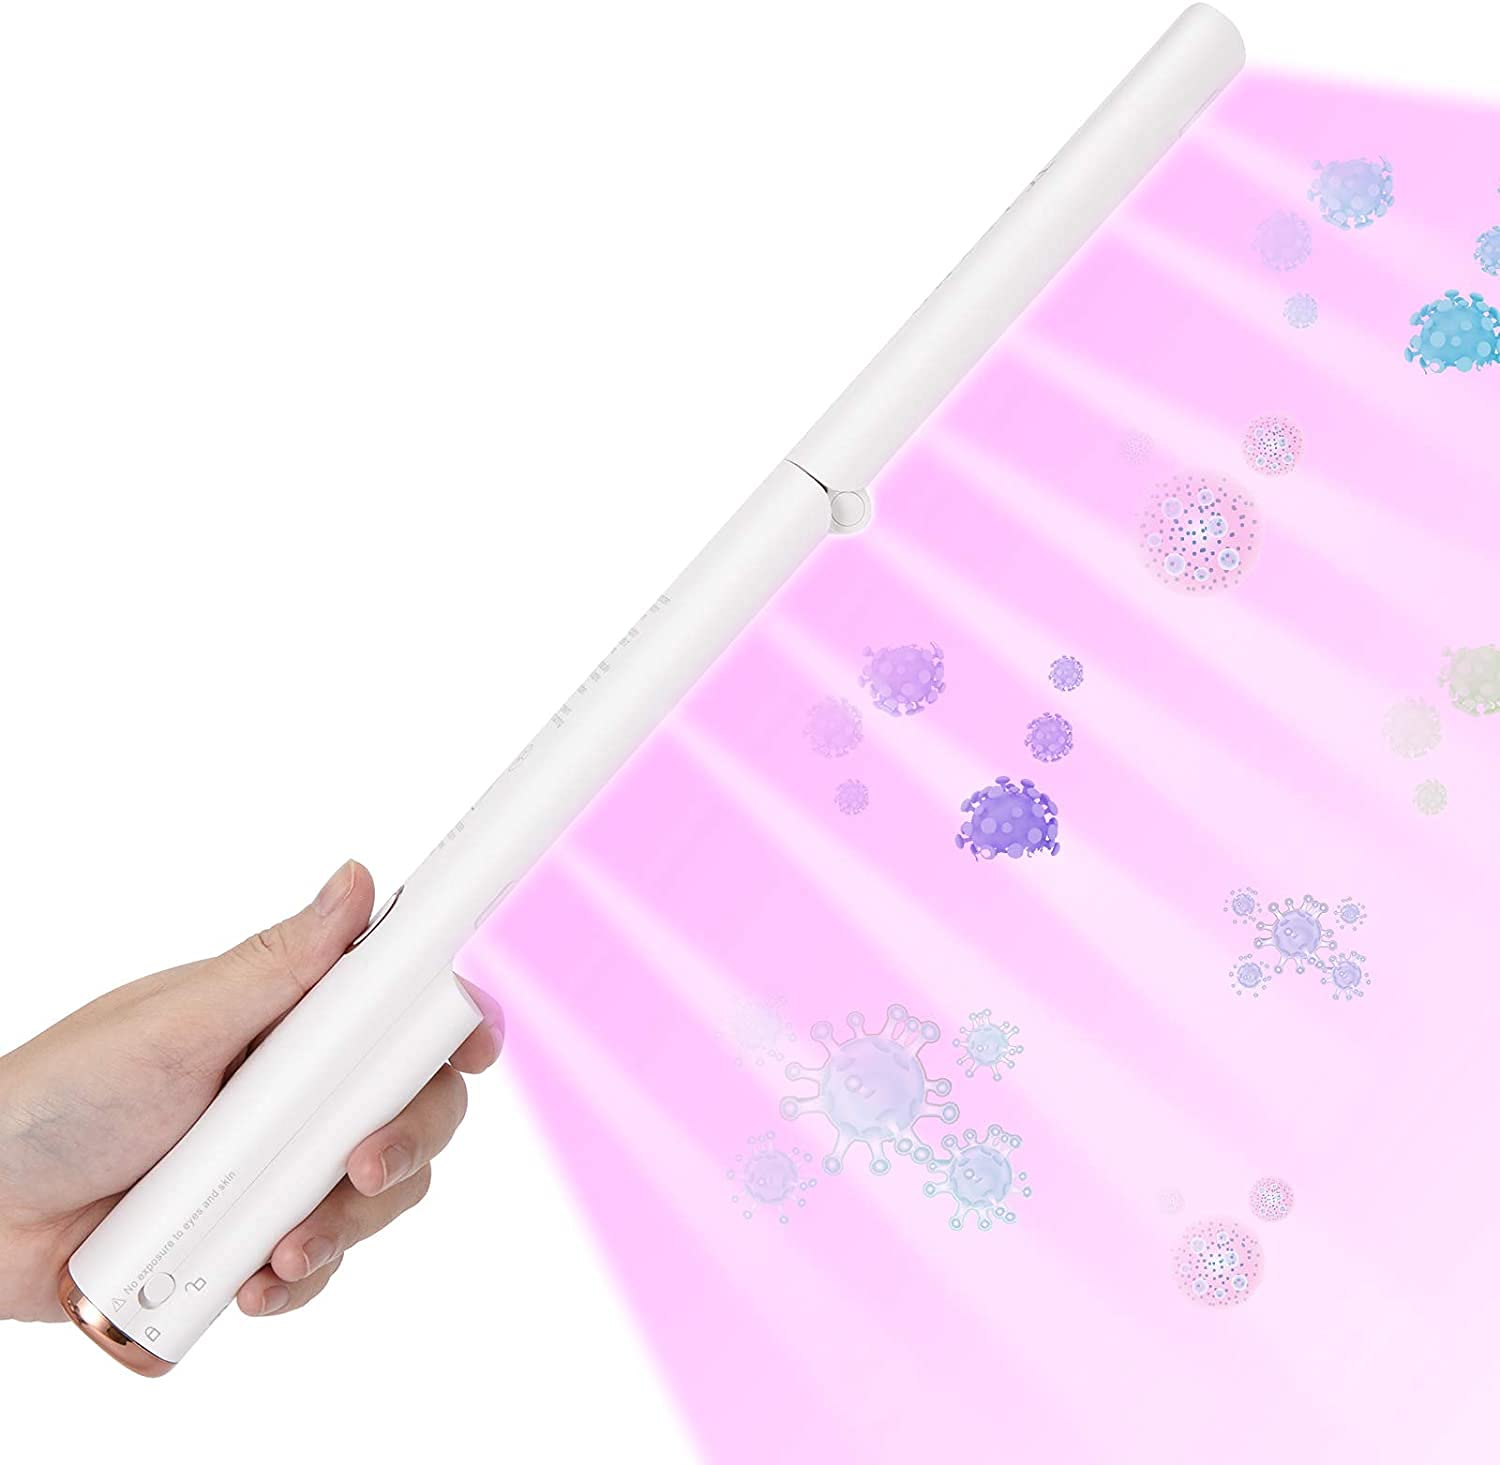 Folding 20 LED UV Light Sanitizer Wand, TSYMO Portable UVC Light Disinfector Lamp Kills 99% of Germs Viruses, 3 Cleaning Modes, Chargeable for Home...